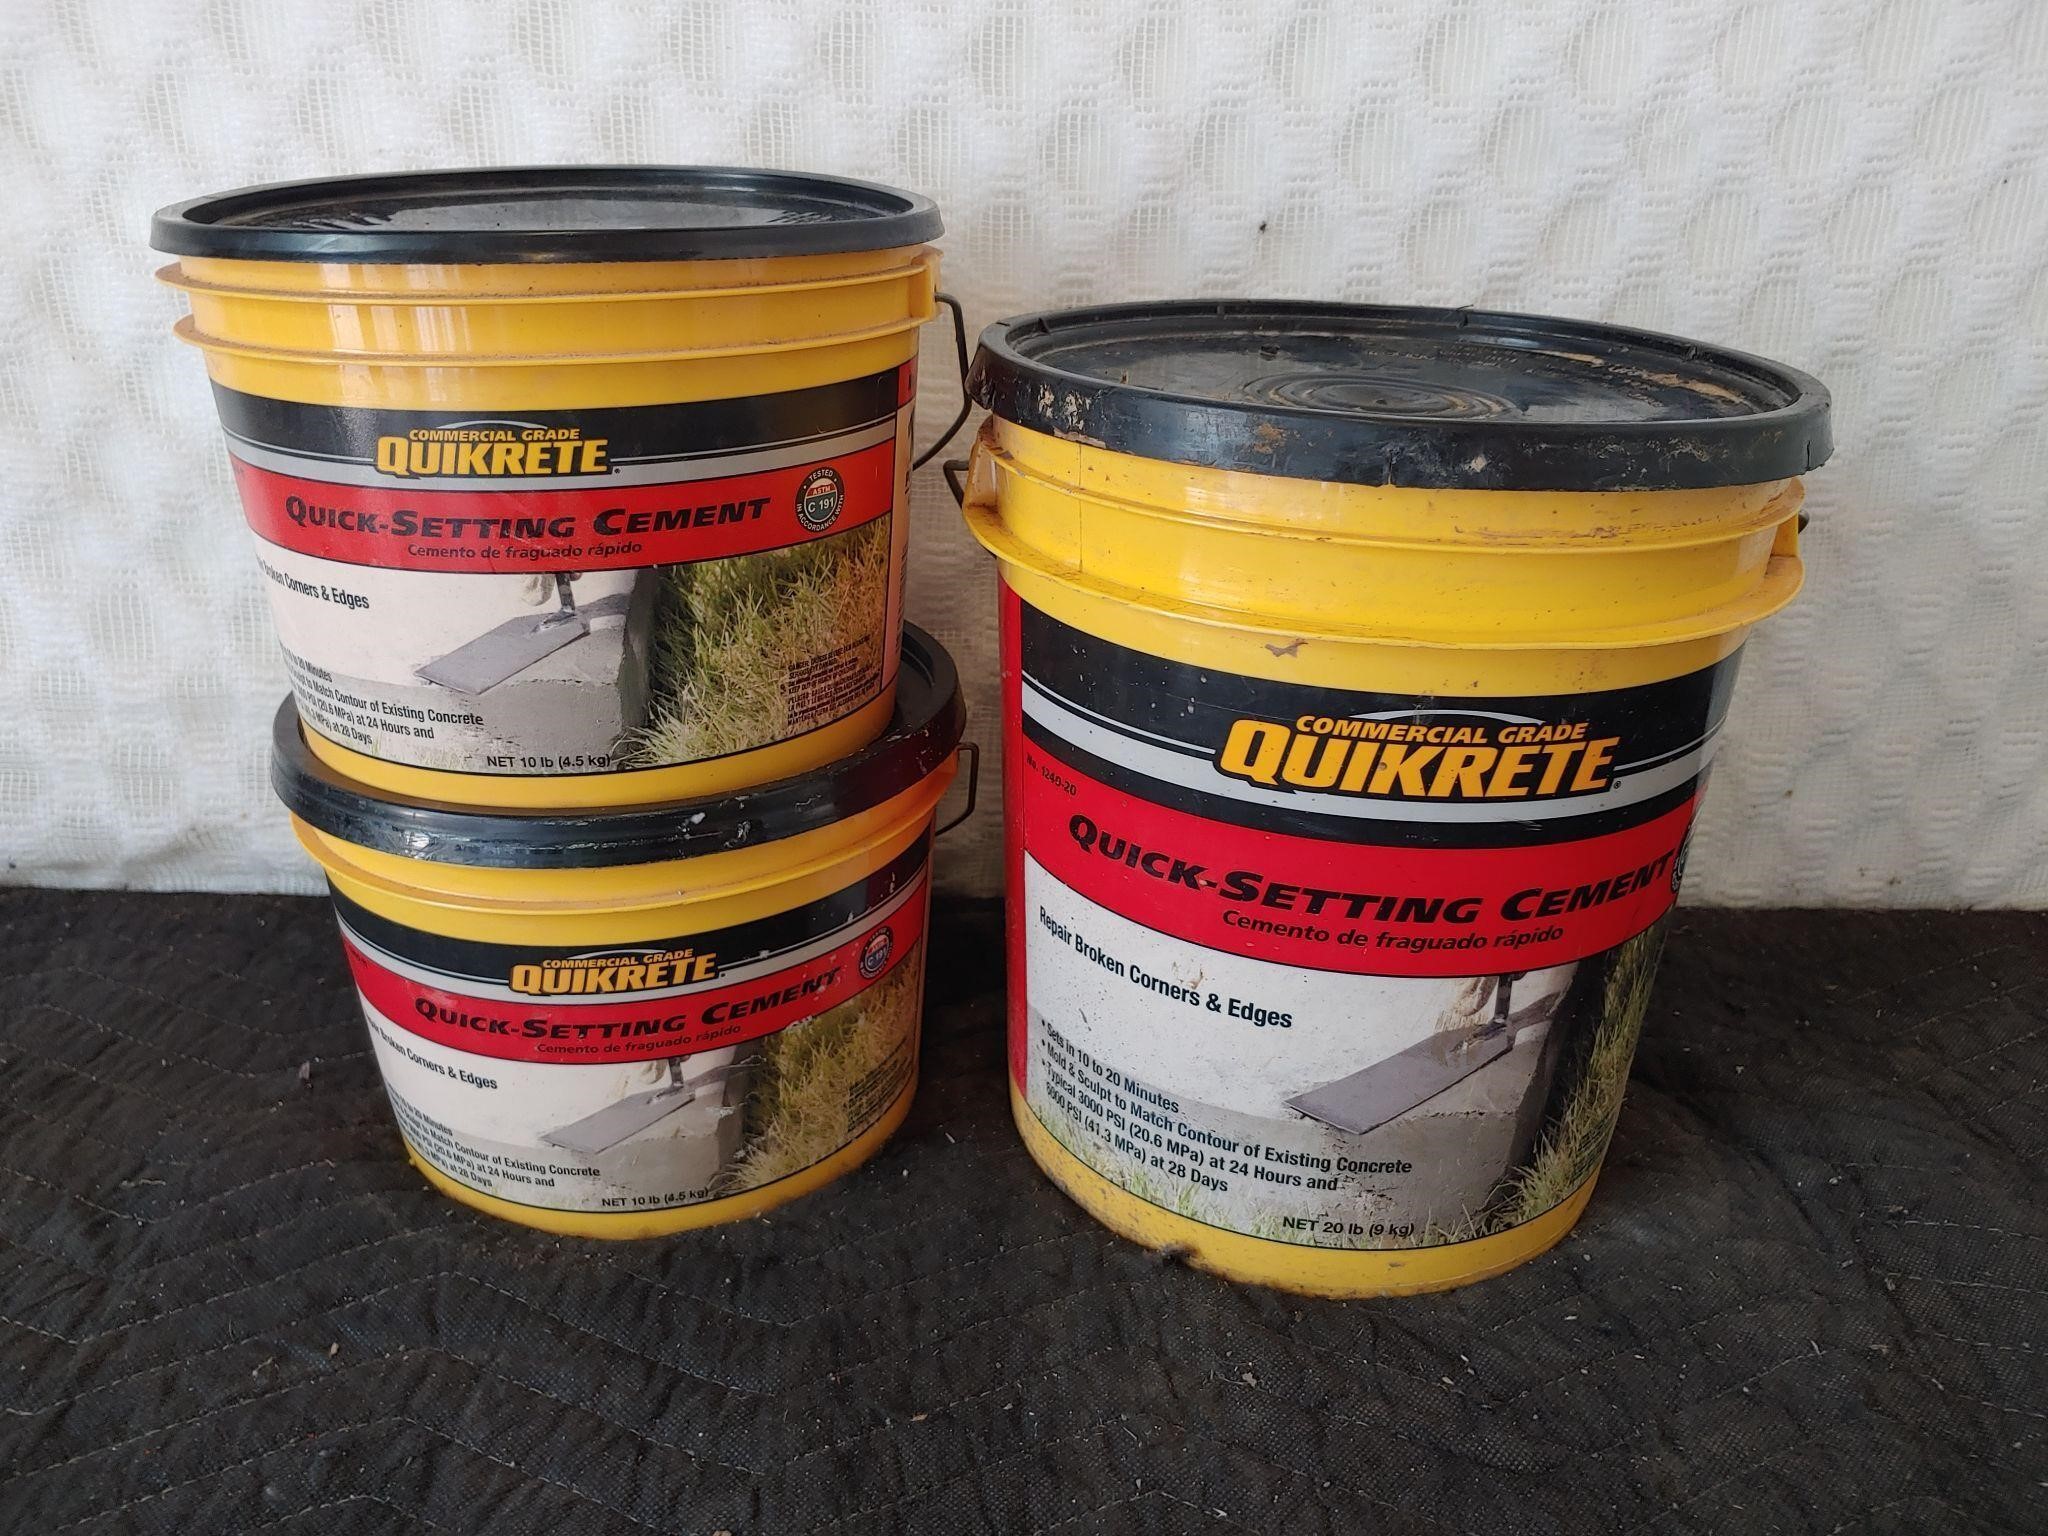 3 buckets of Quikrete quick setting cement